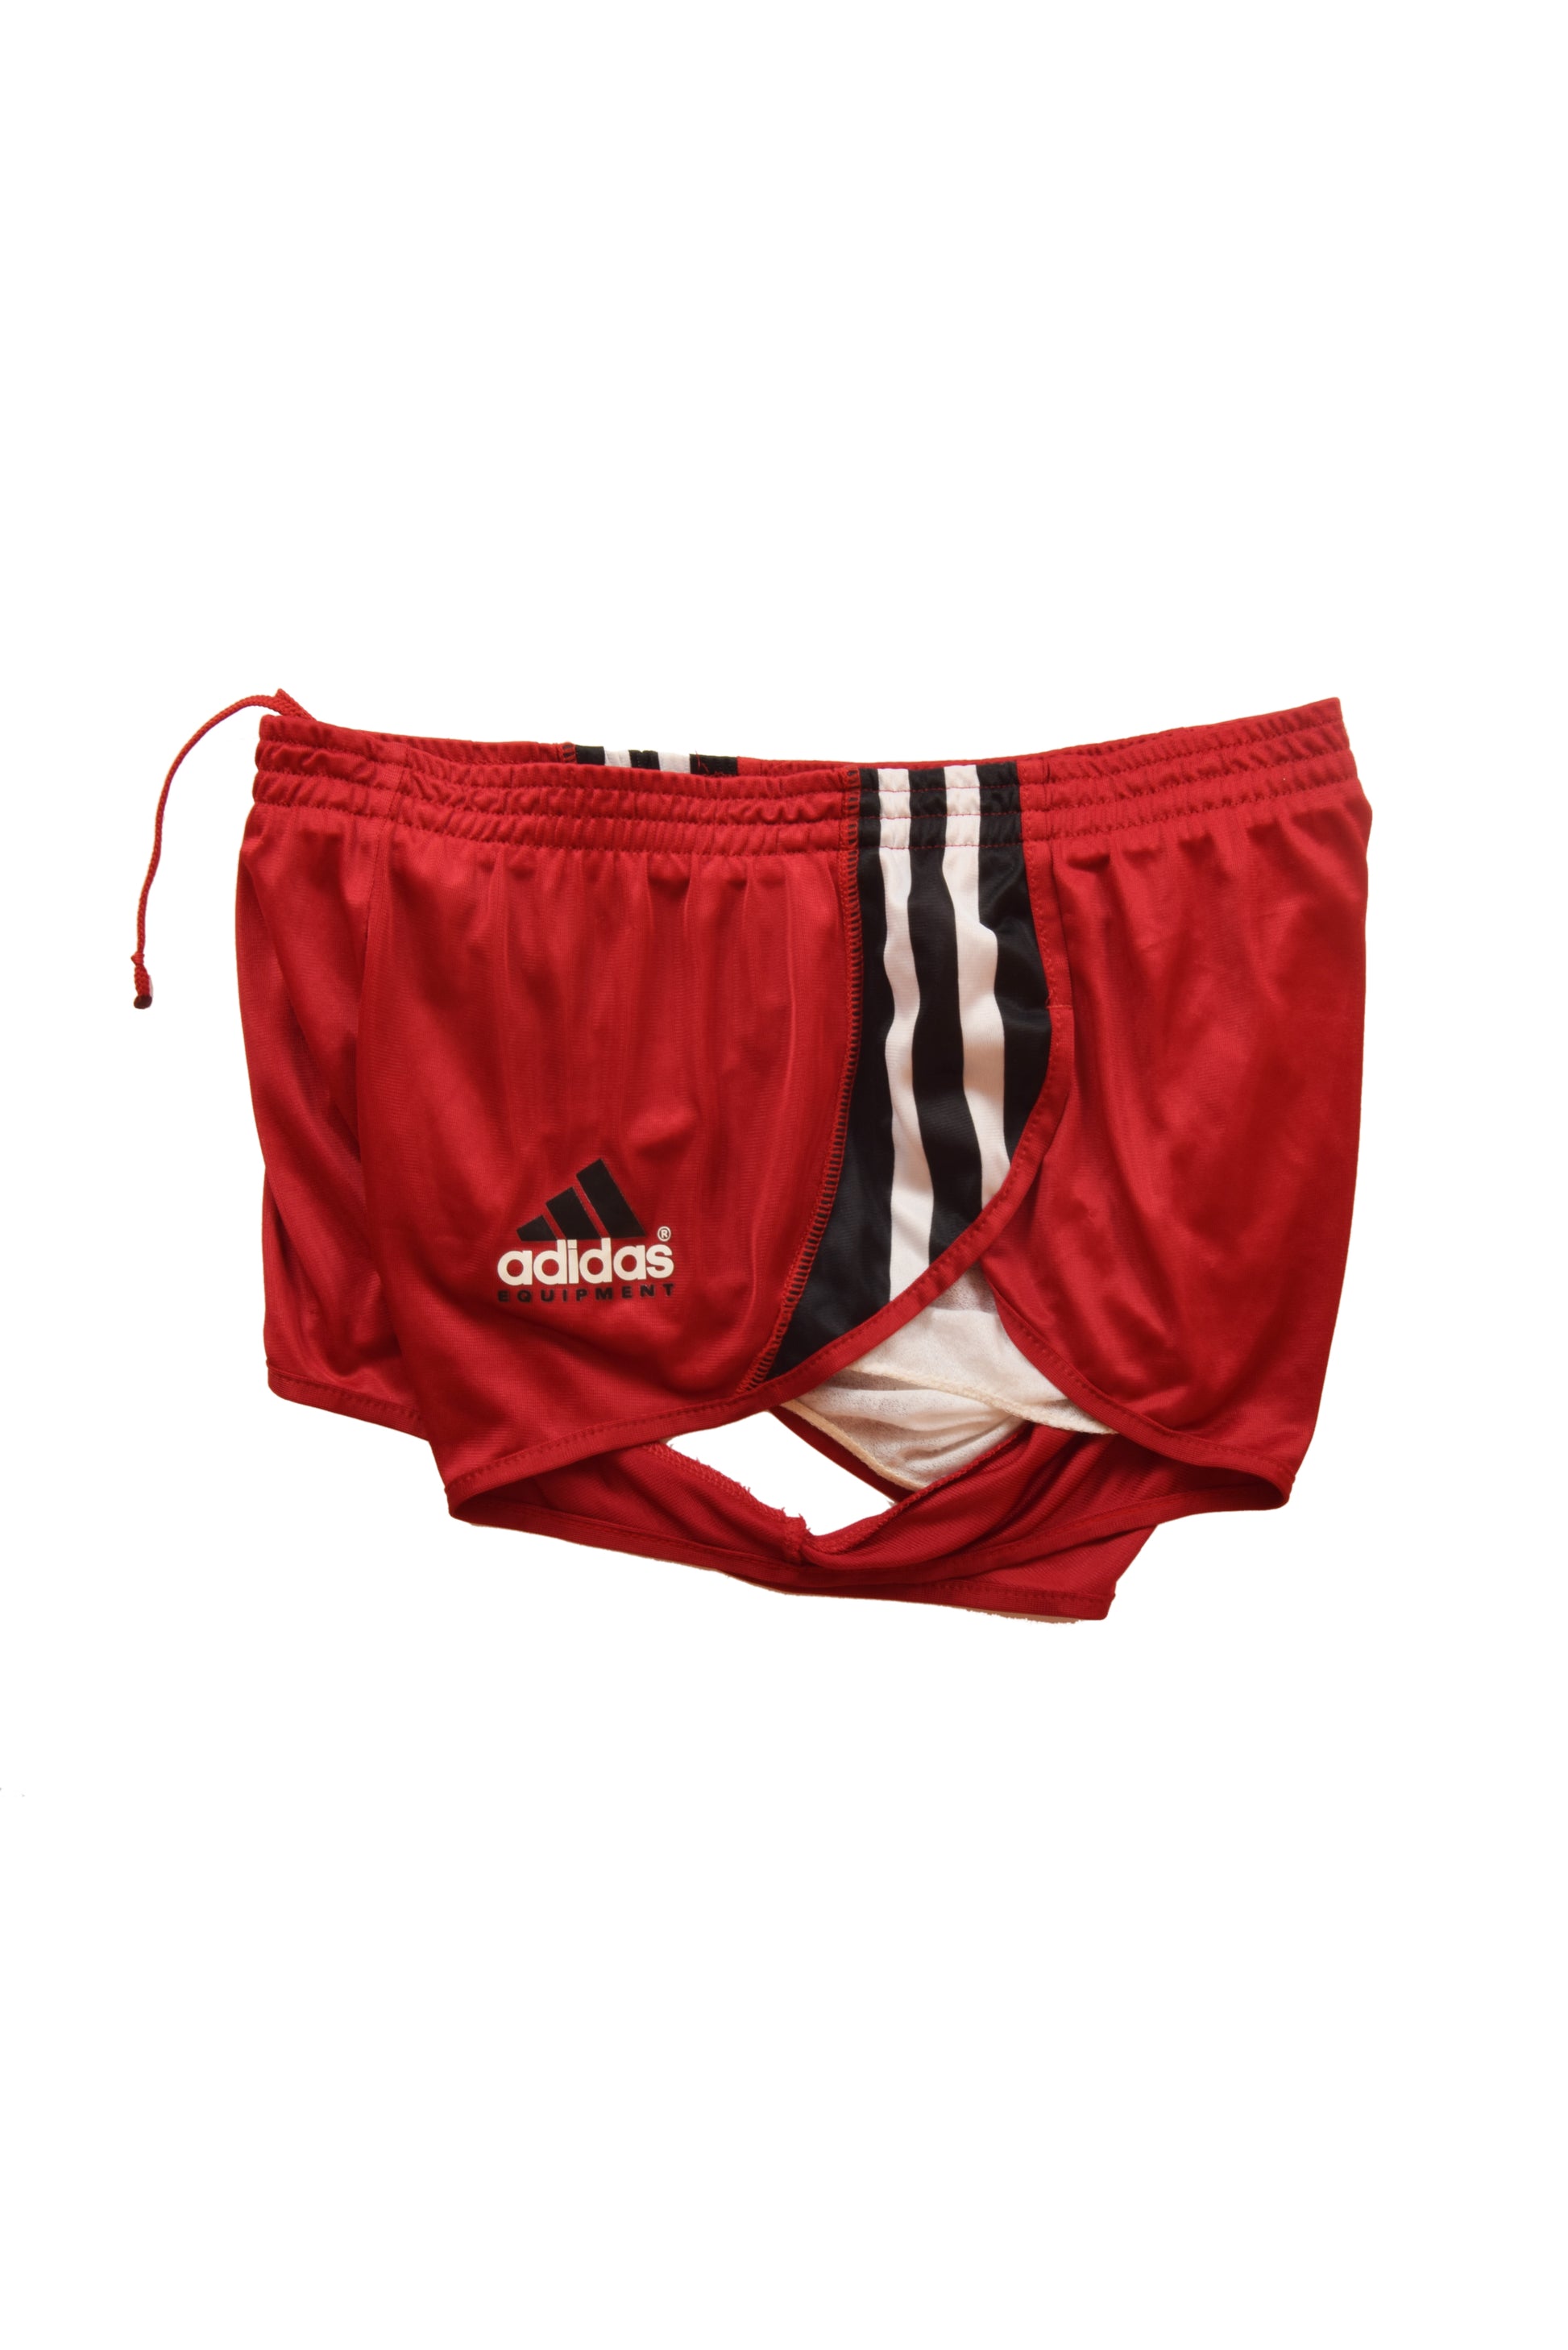 Vintage Adidas Equipment Runners Shorts Festival Size M